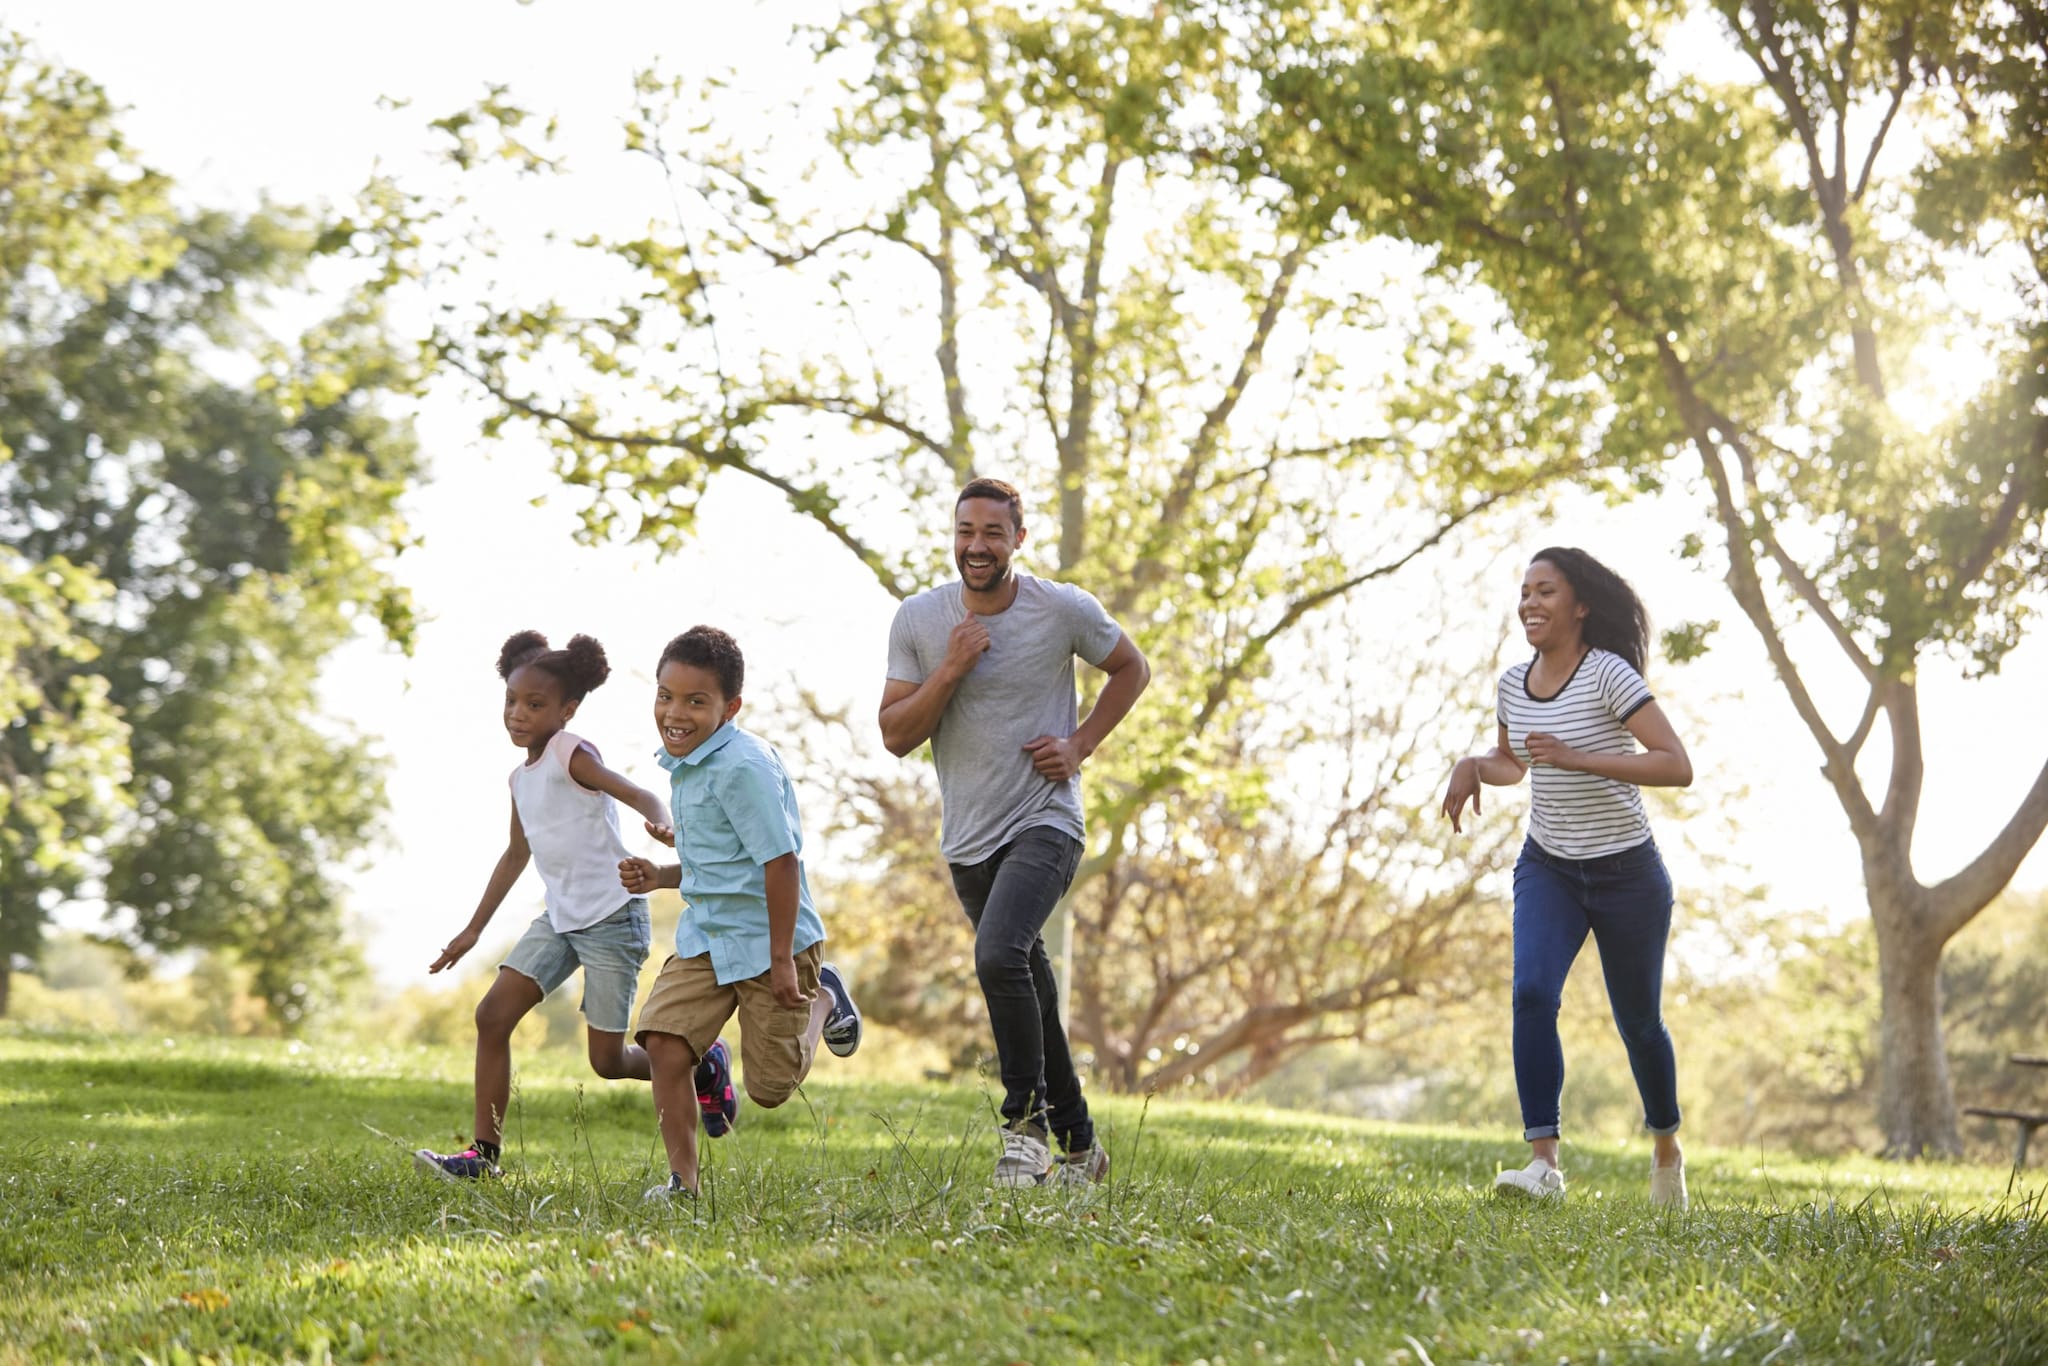 Family of two children and two adults run and play together outdoors.